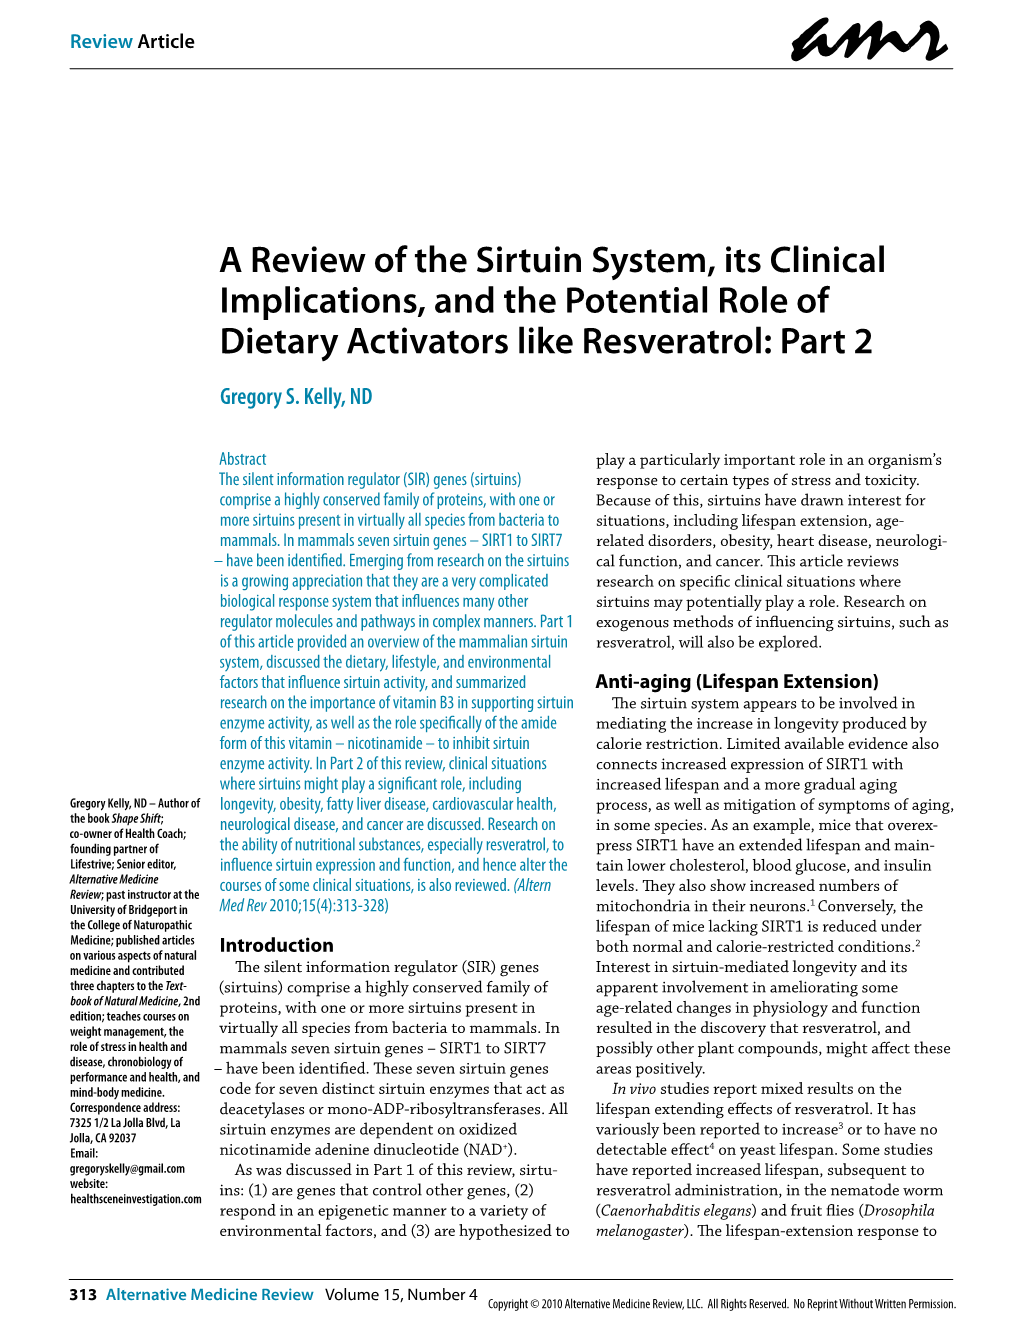 A Review of the Sirtuin System, Its Clinical Implications, and the Potential Role of Dietary Activators Like Resveratrol: Part 2 Gregory S